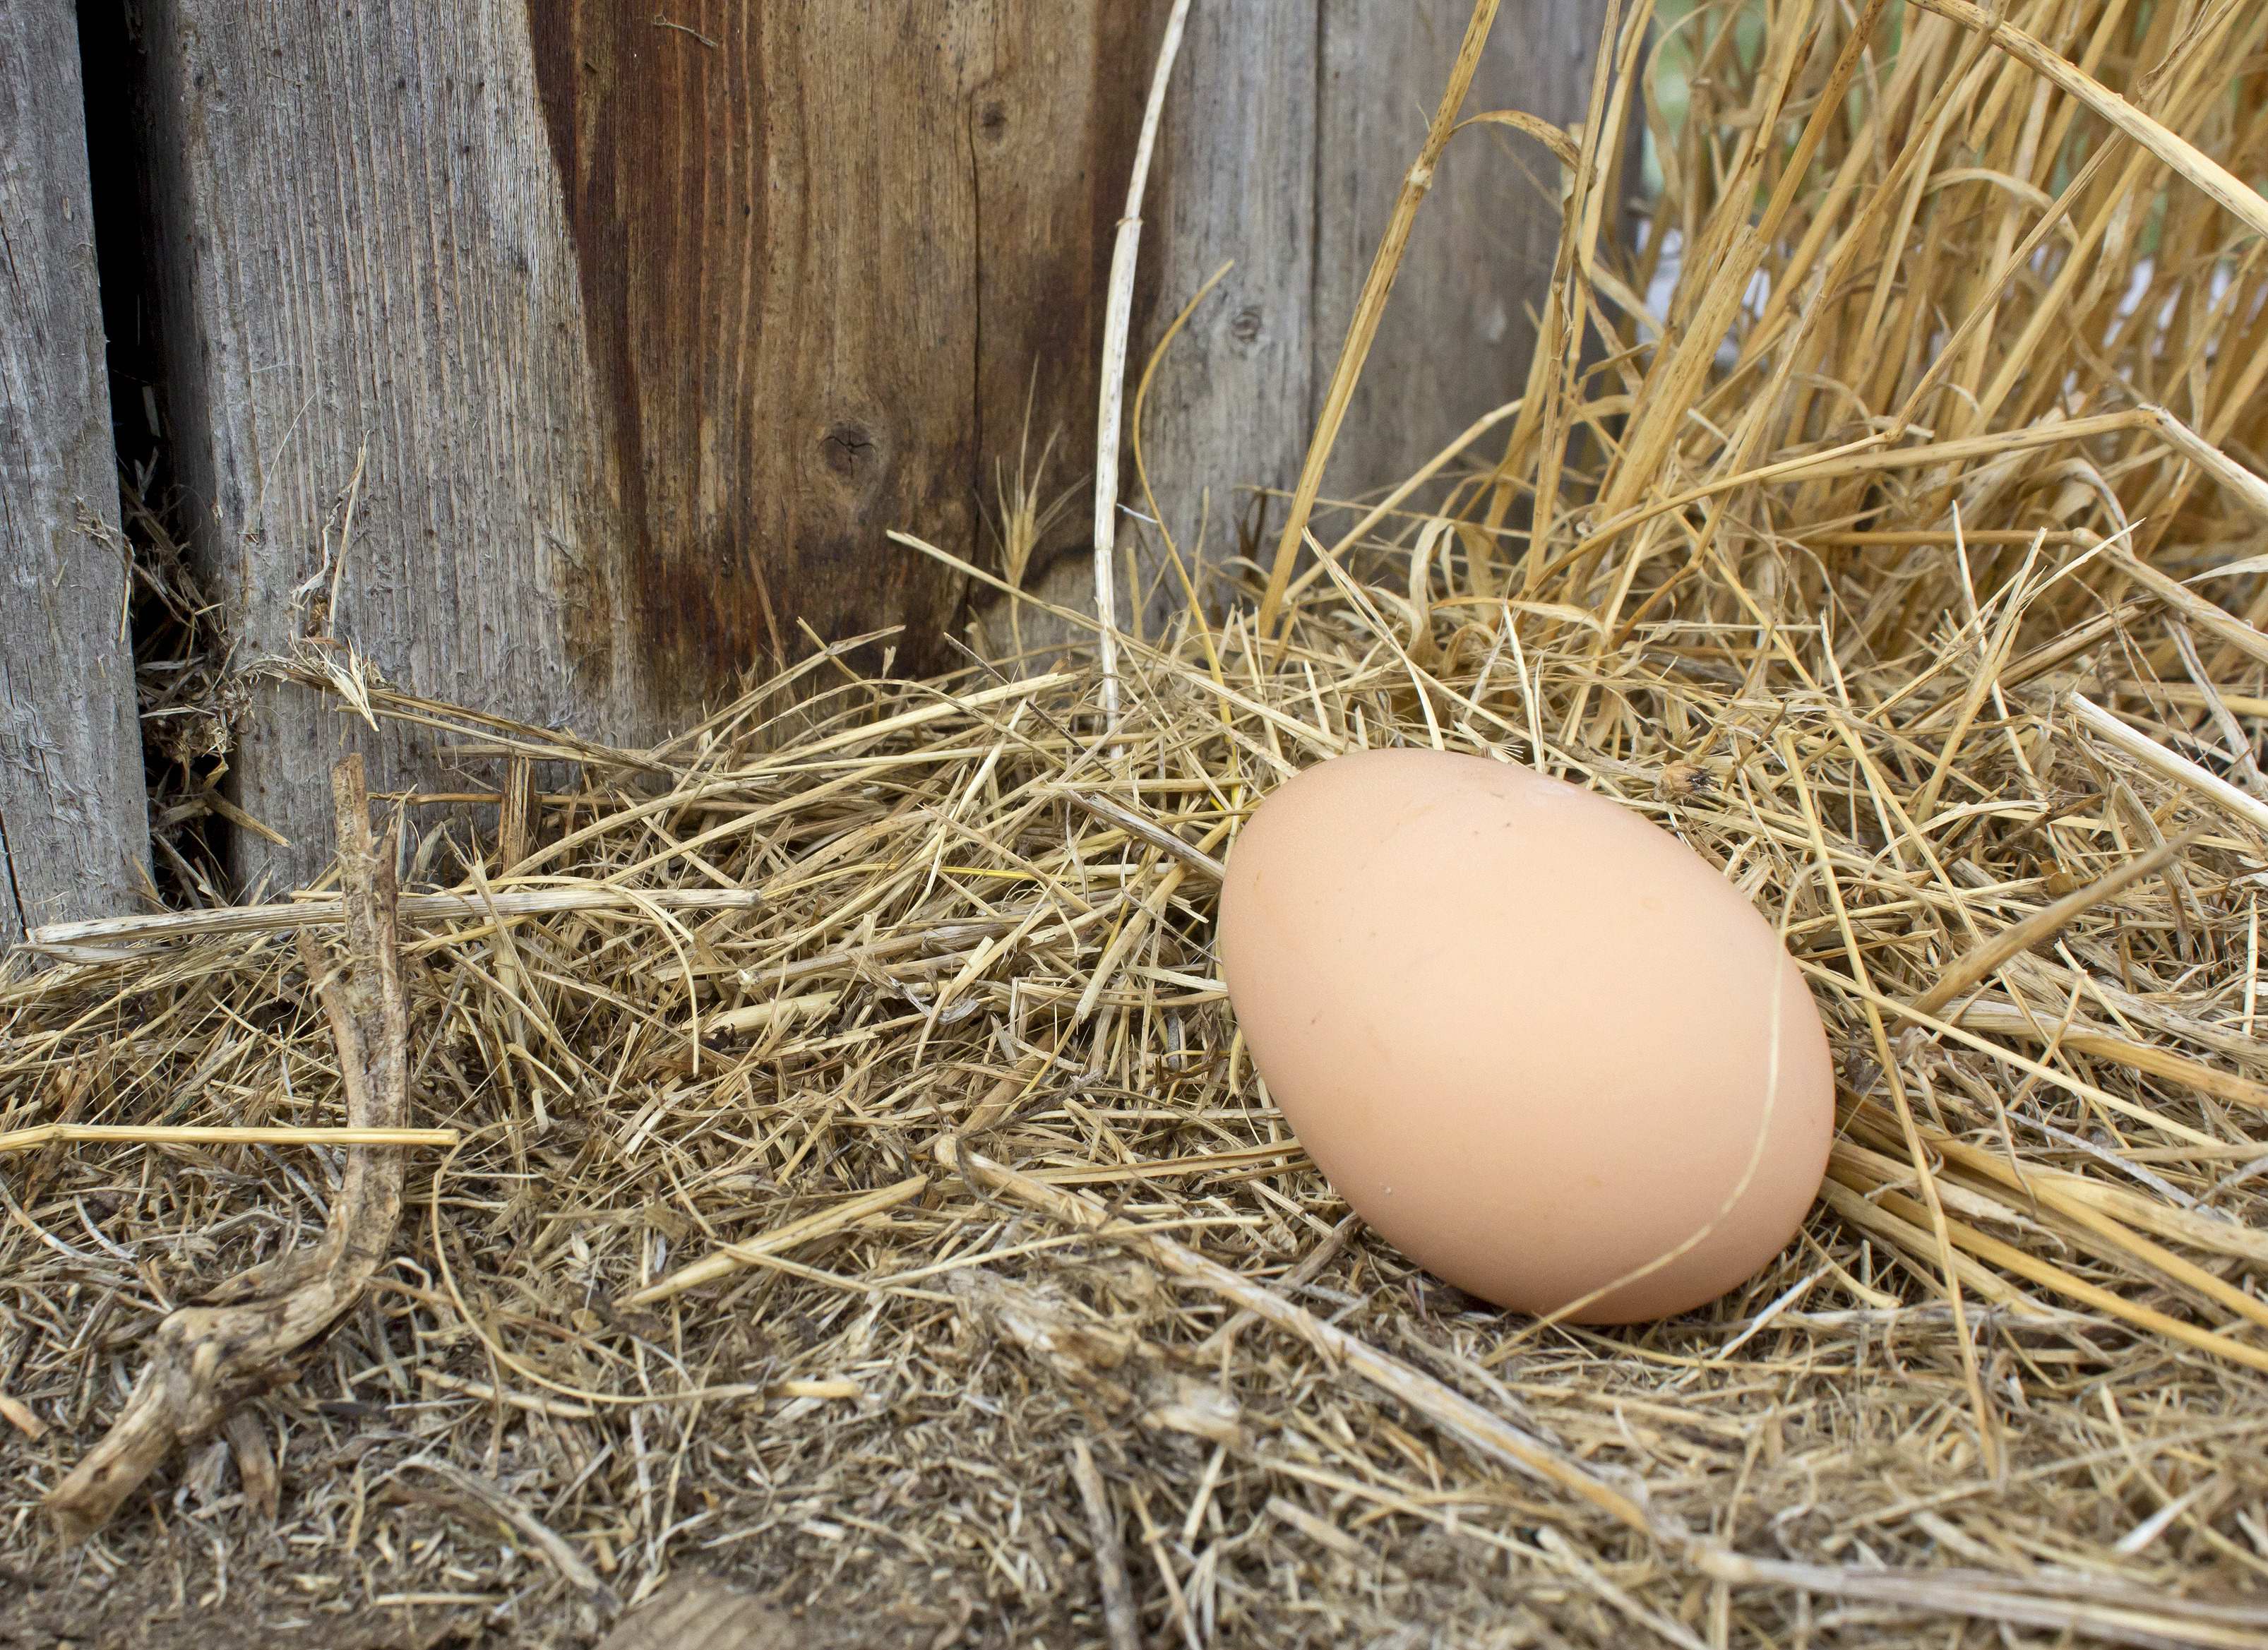 A chicken egg lays on the ground after a hen didn't lay it in a nesting box.